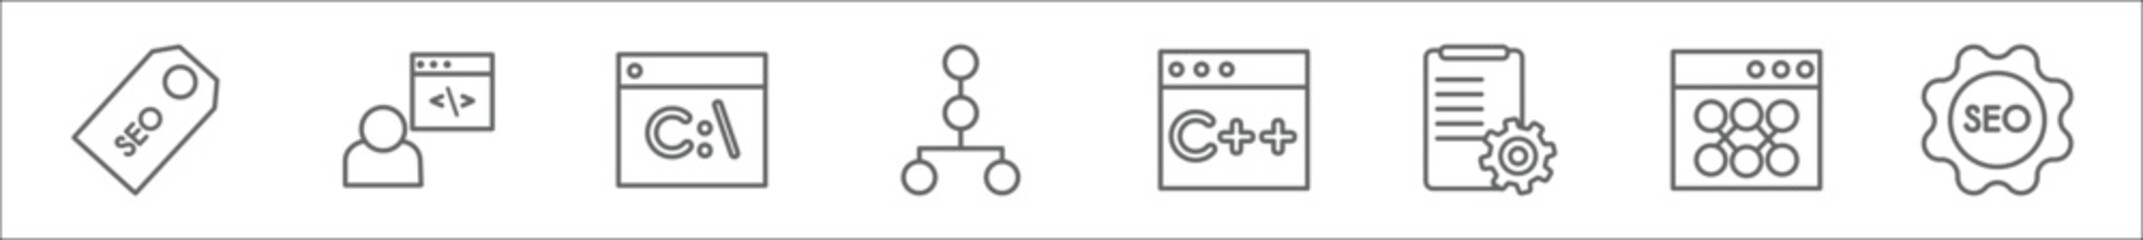 outline set of seo line icons. linear vector icons such as seo tags, developer, command, sitemap, programming language, compiler, seo monitoring, badge